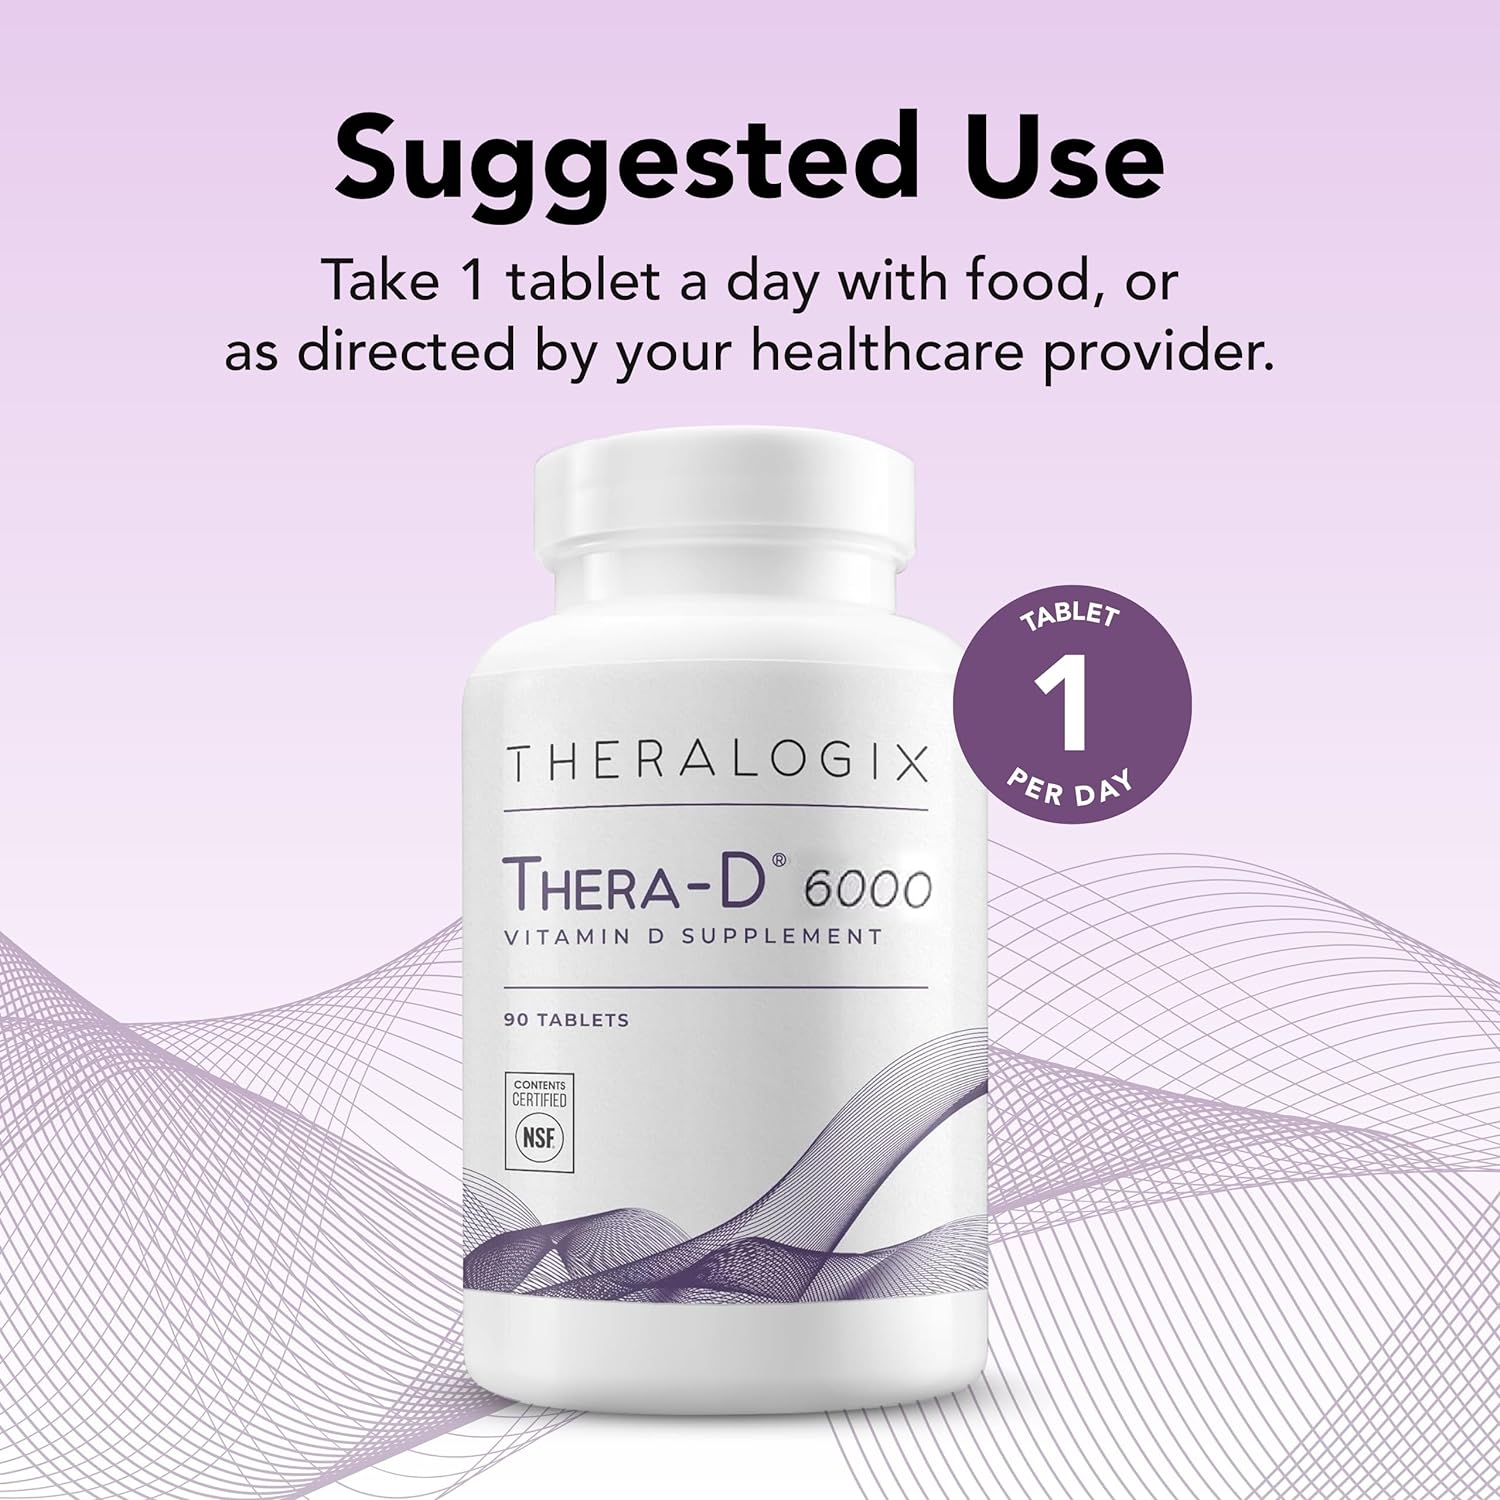 Theralogix Thera-D 6000 Vitamin D Supplement - 6,000 IU (150 mcg) Vitamin D3 Tablets - 90-Day Supply - Immune Support Supplement for Women  Men - Aids Bone  Heart Health - NSF Certified - 90 Tablets